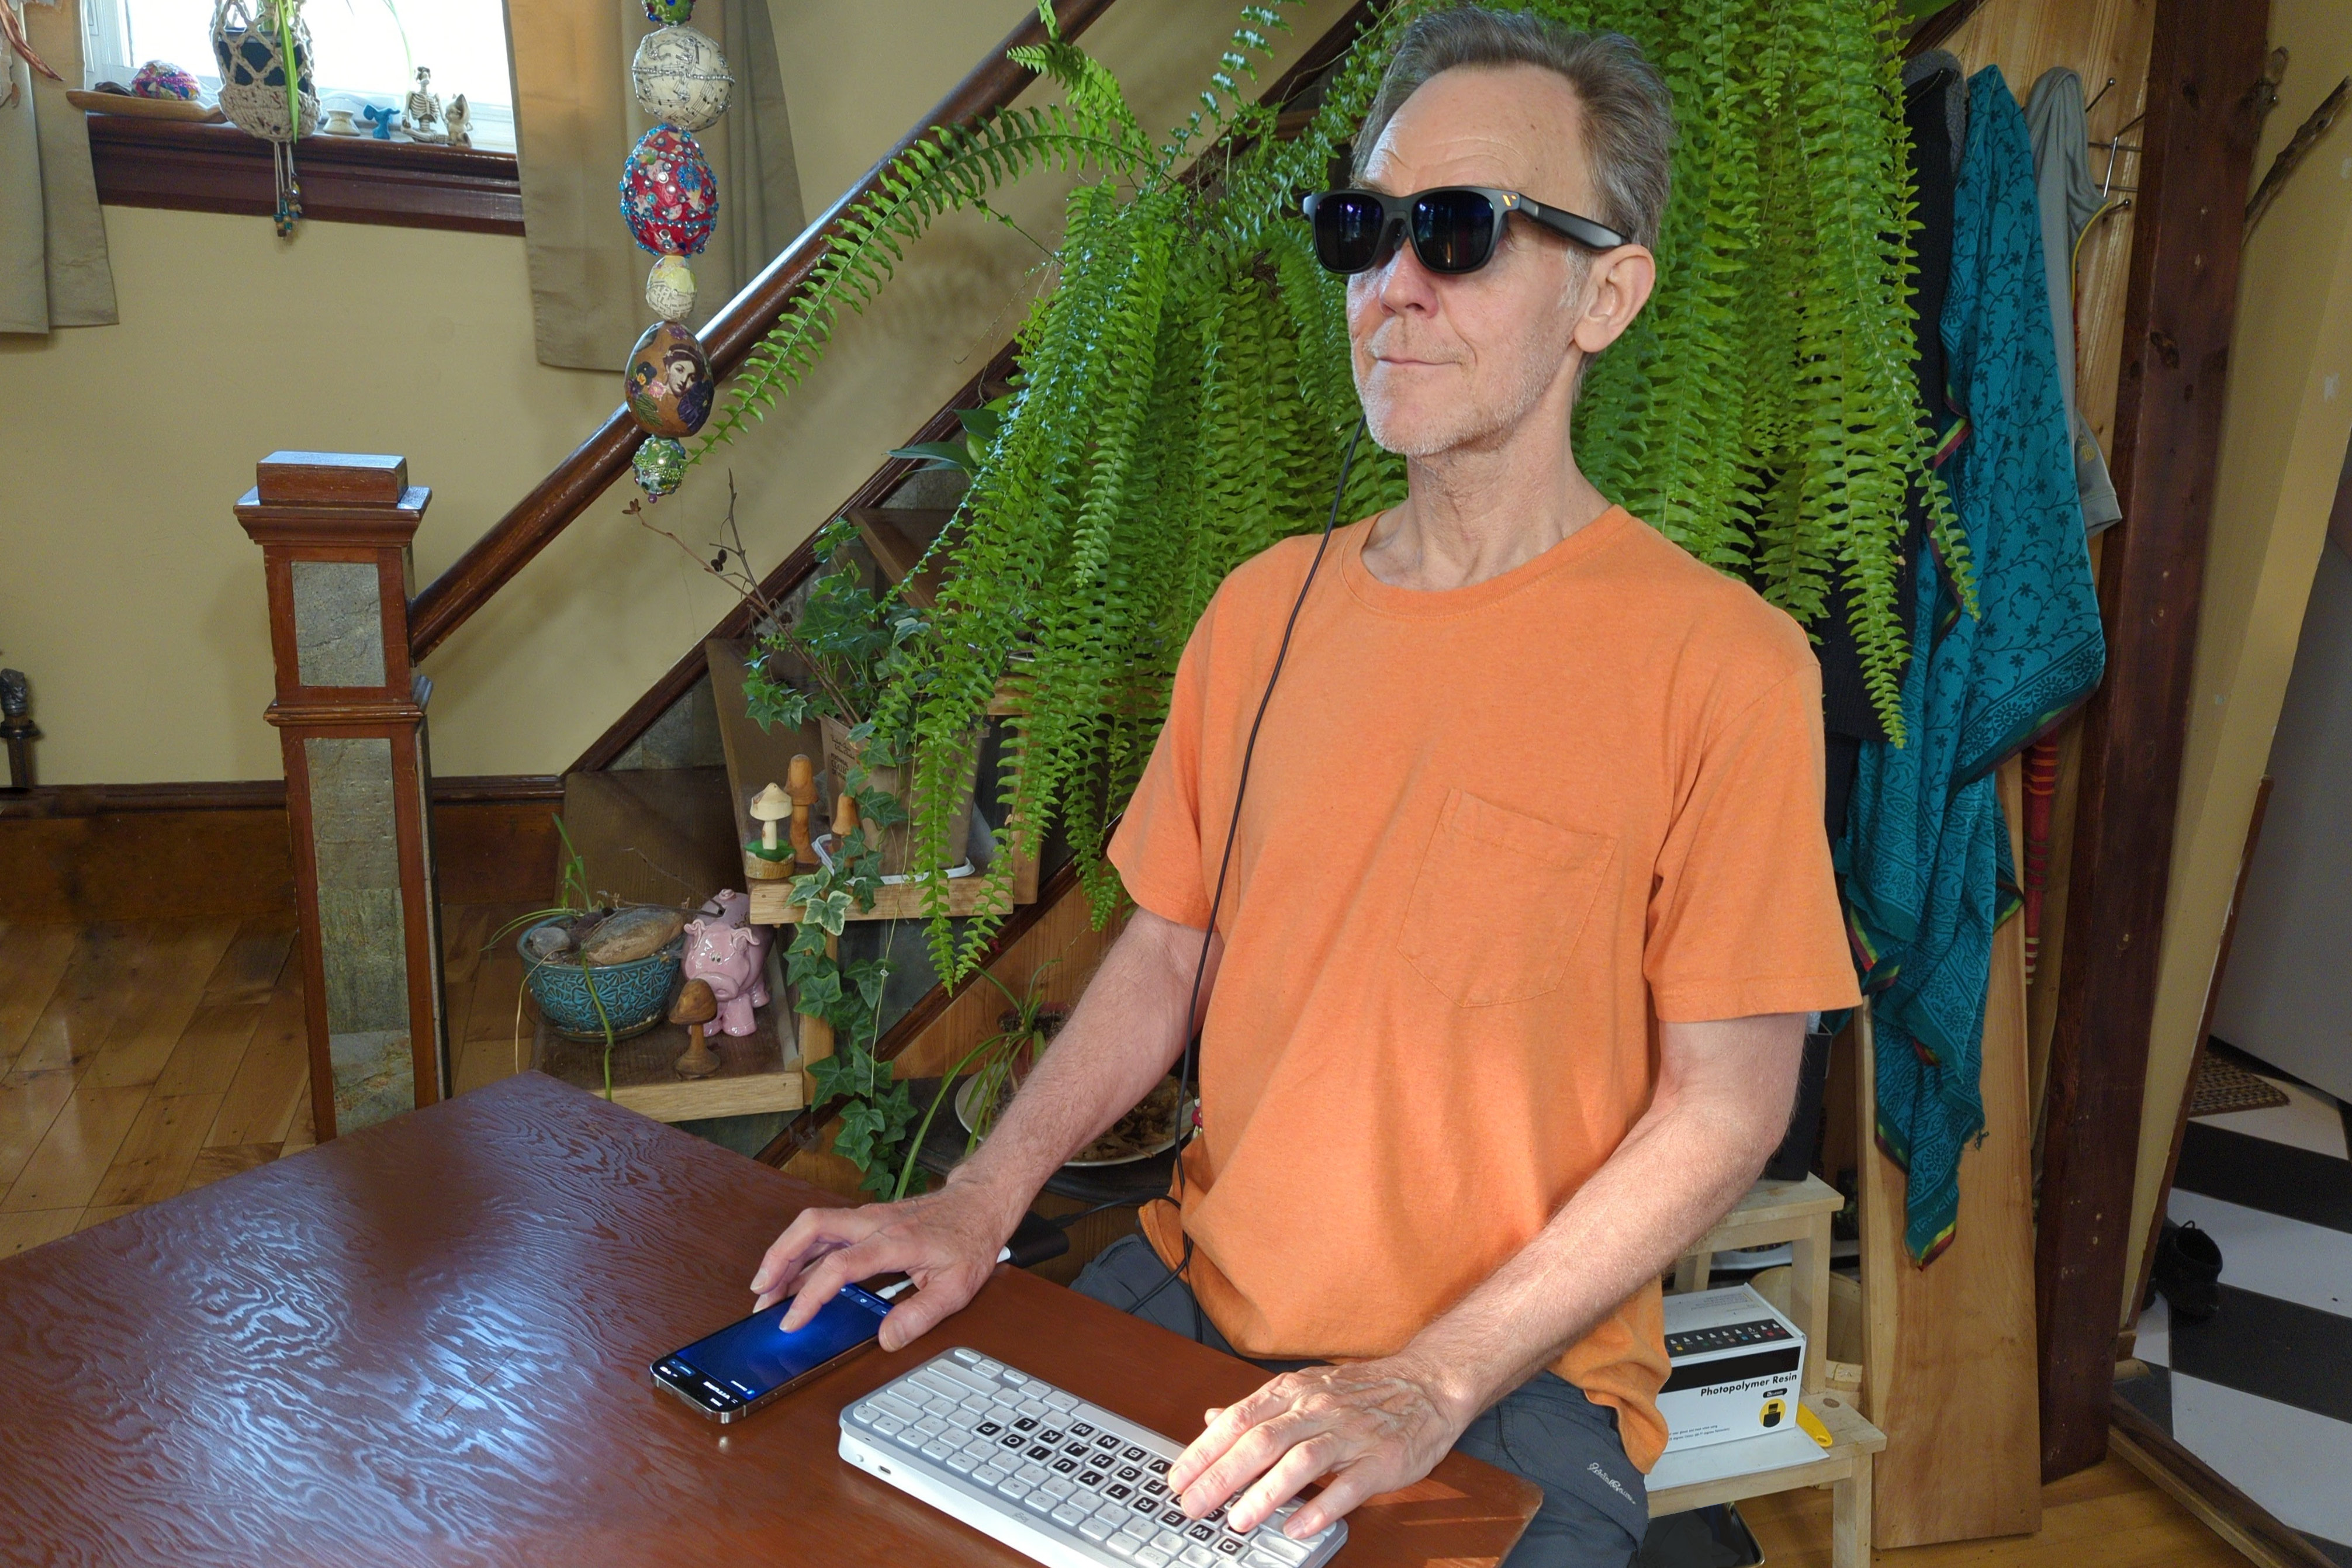 Alan Truly wears Viture Pro smart glasses while working with an iPhone and Bluetooth keyboard.